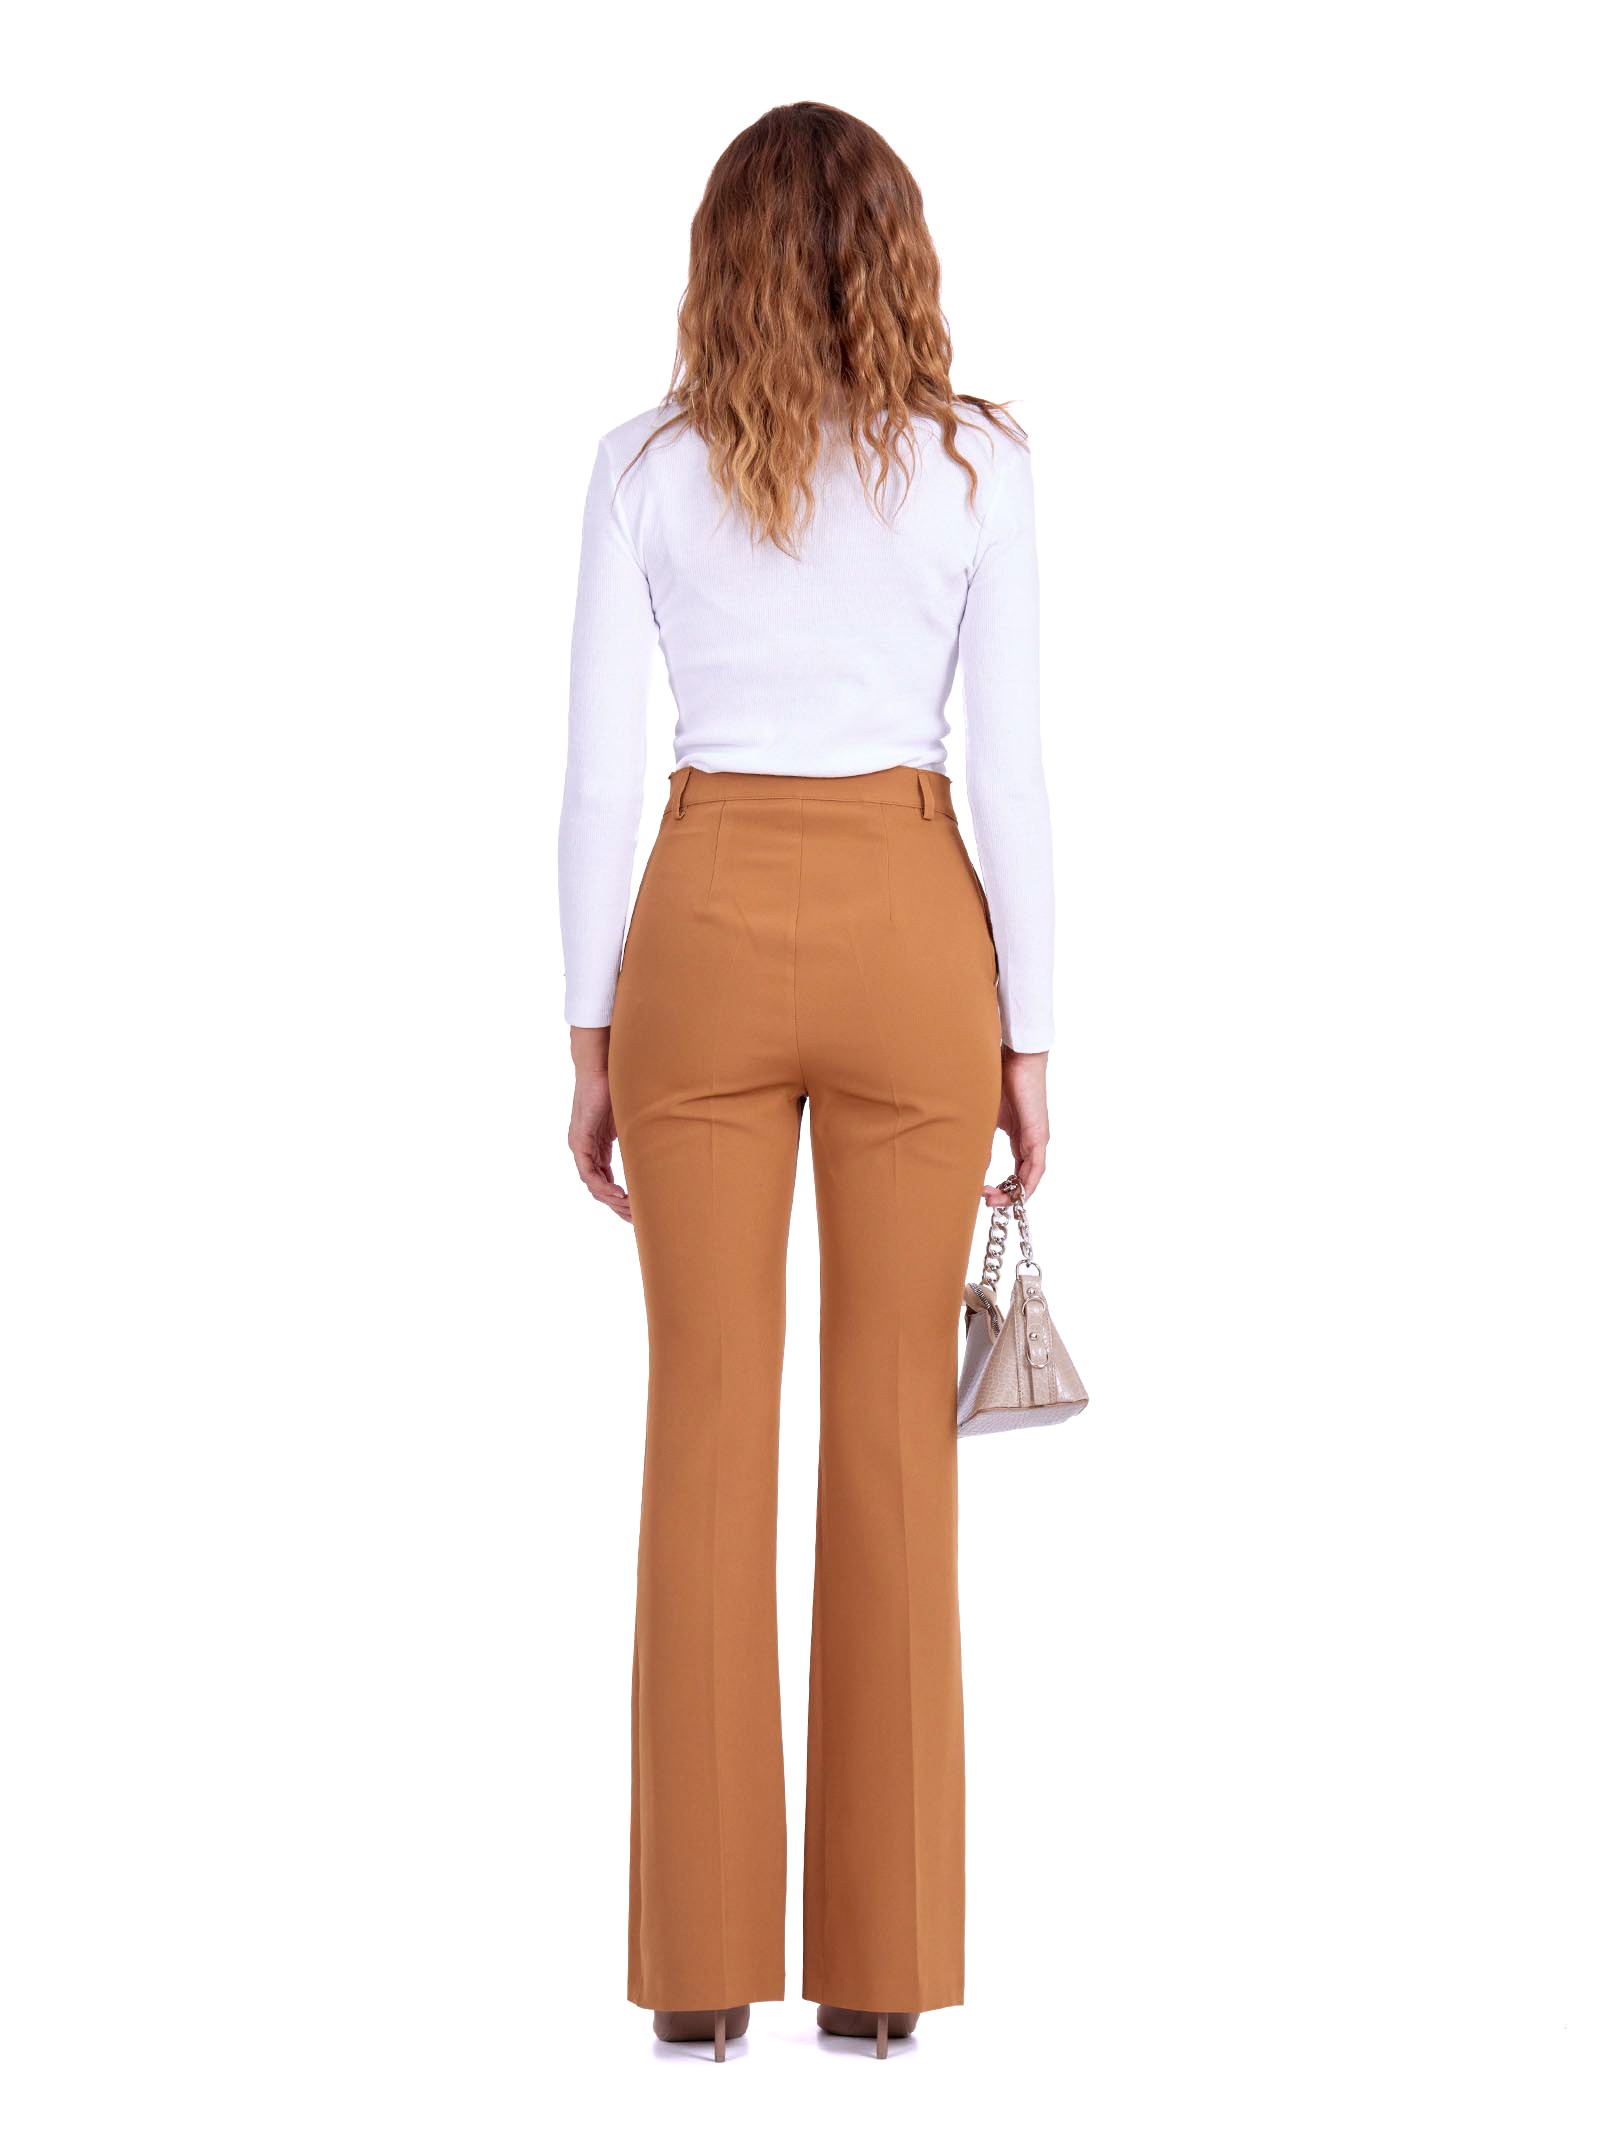 The bell bottoms Brown pants 